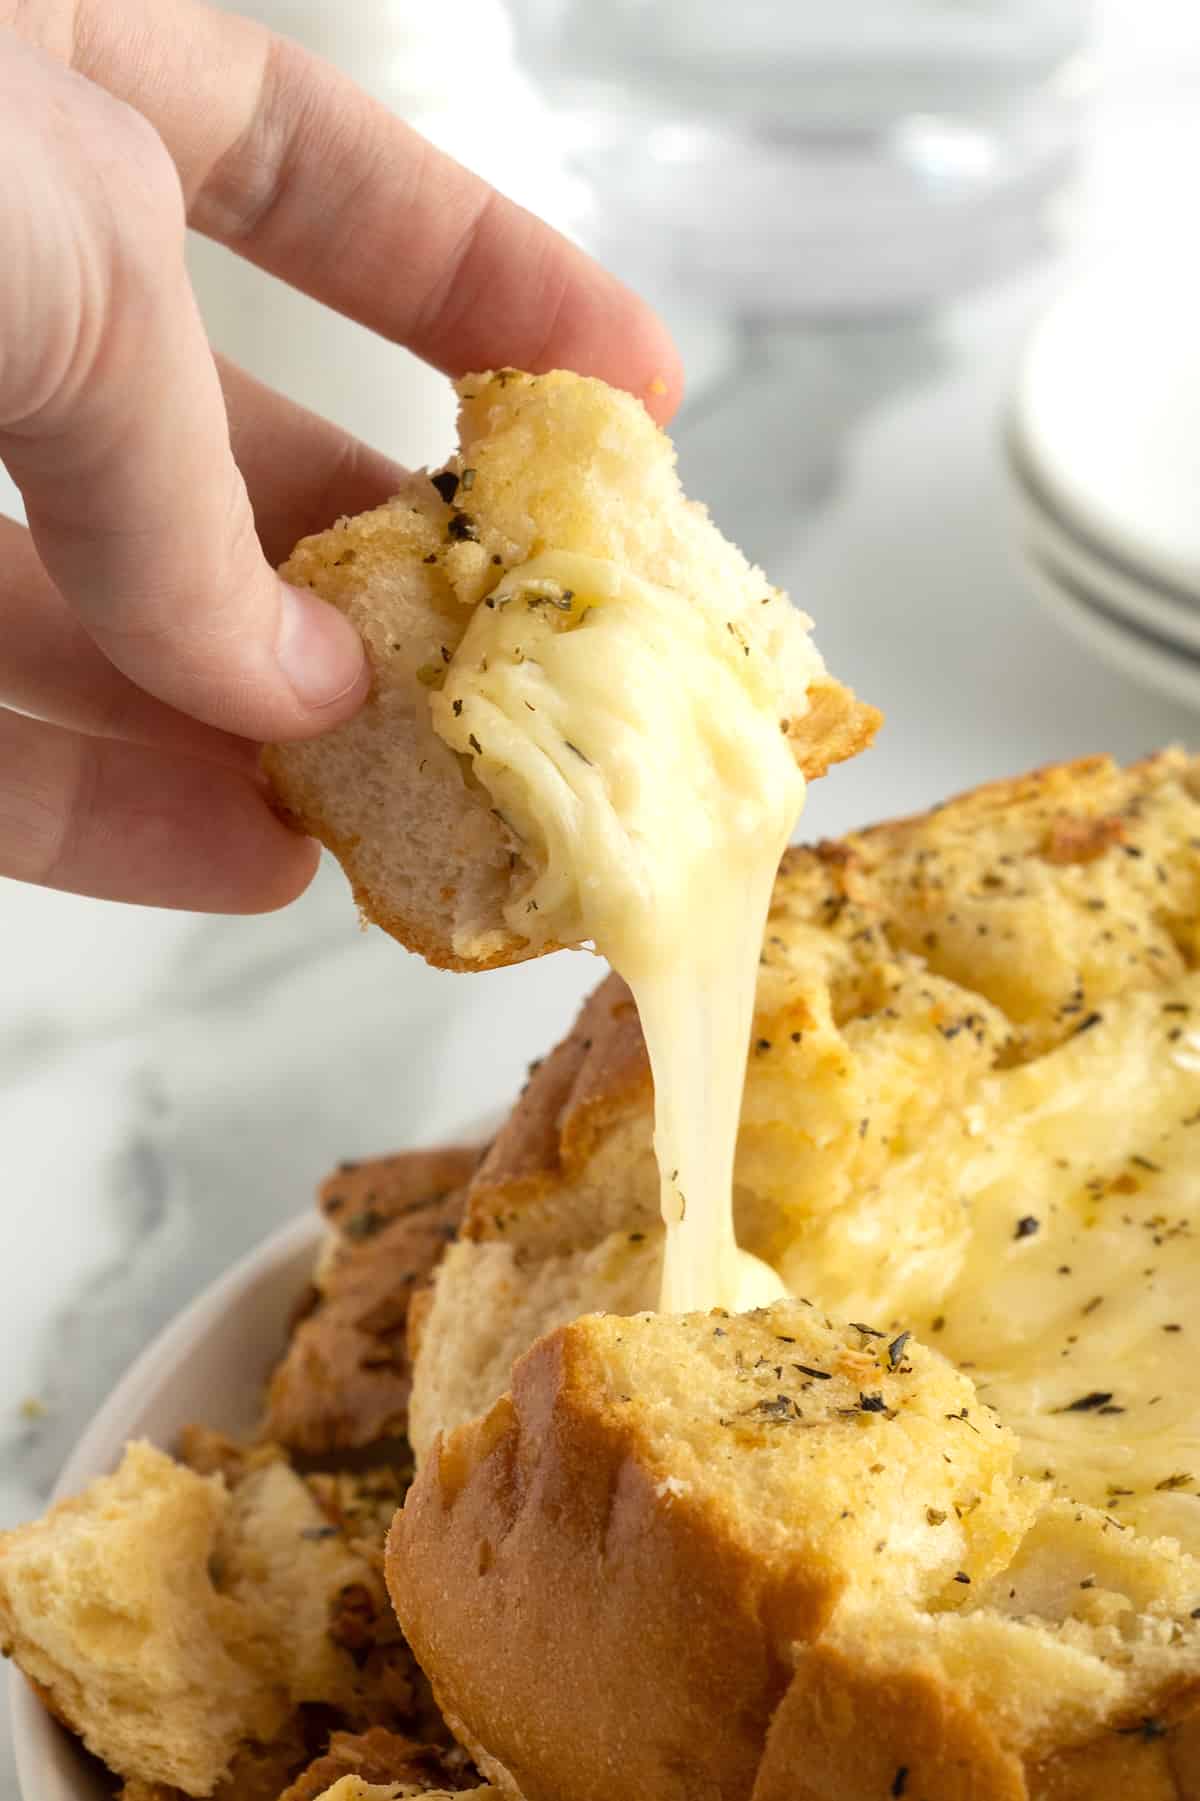 A hand holding a bread chunk dipped in melted brie.